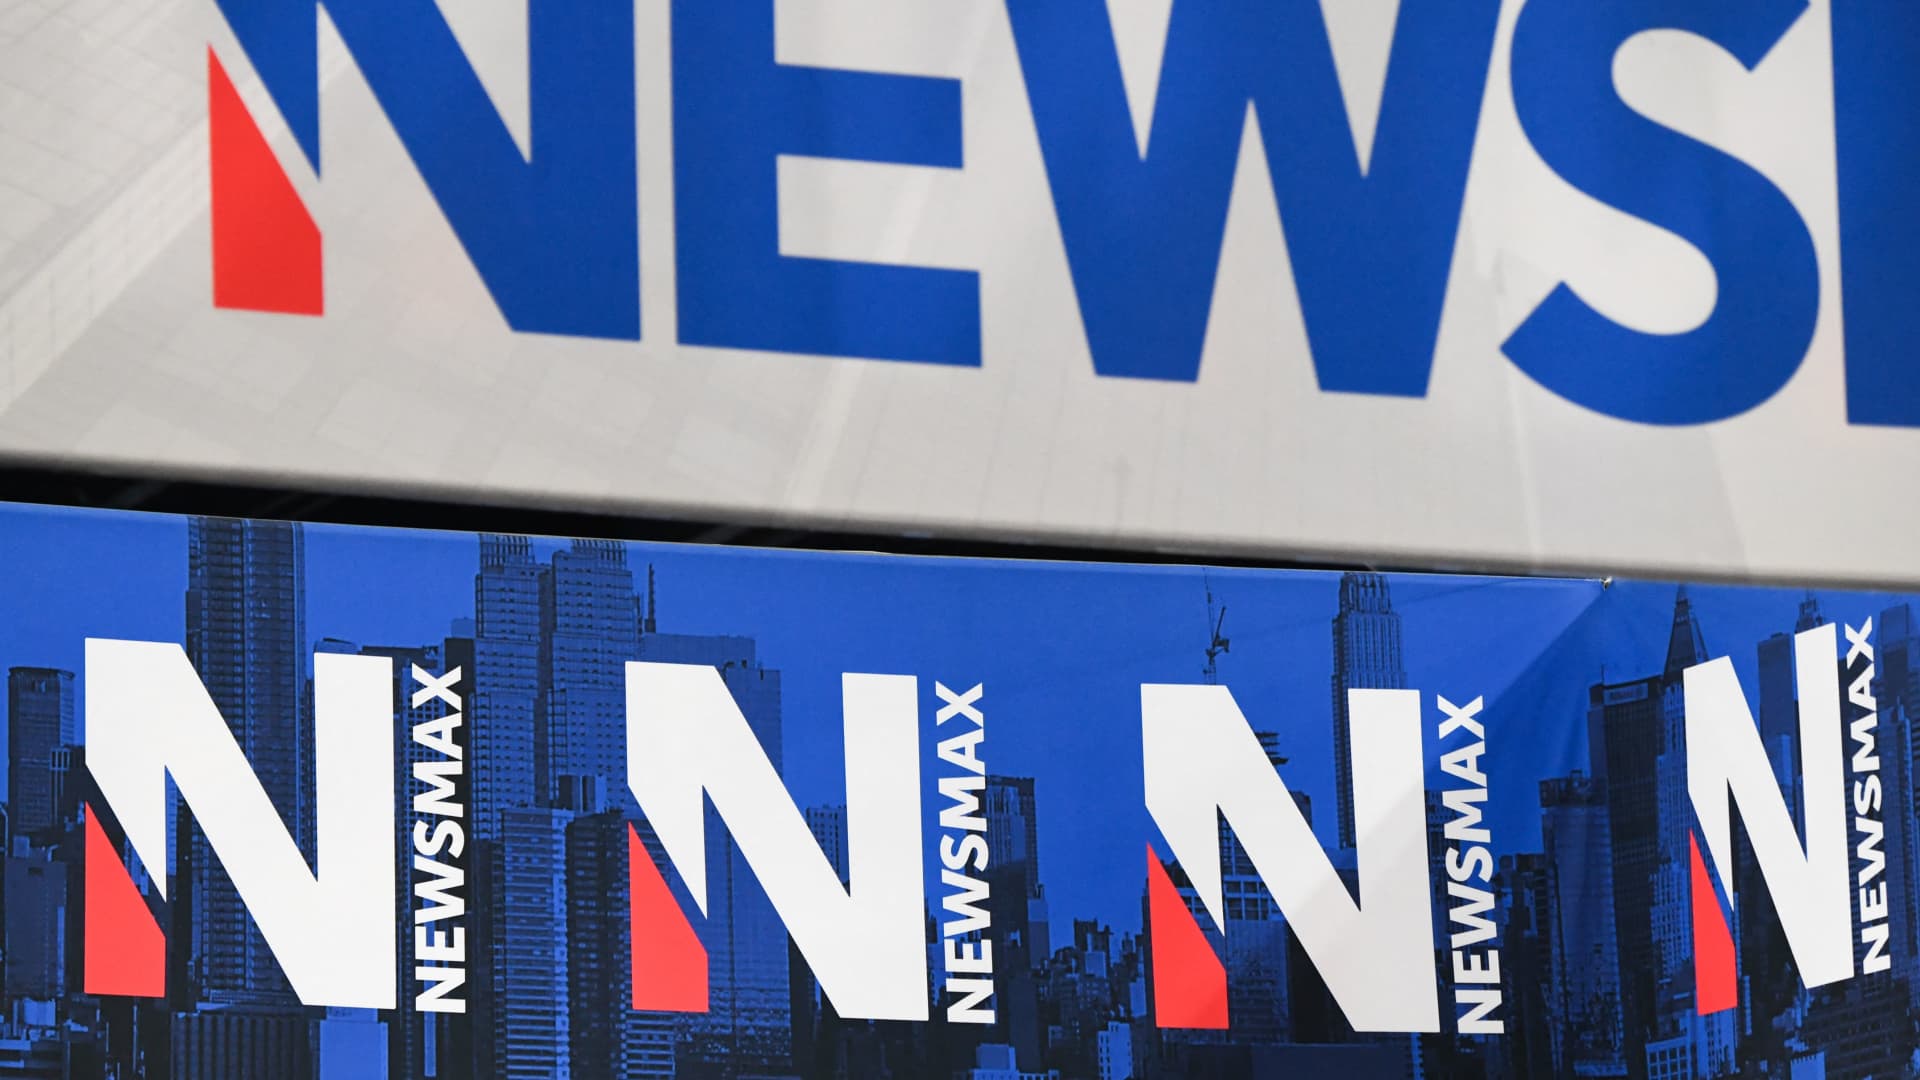 Qatari royal invested $50 million in pro-Trump news channel Newsmax: report